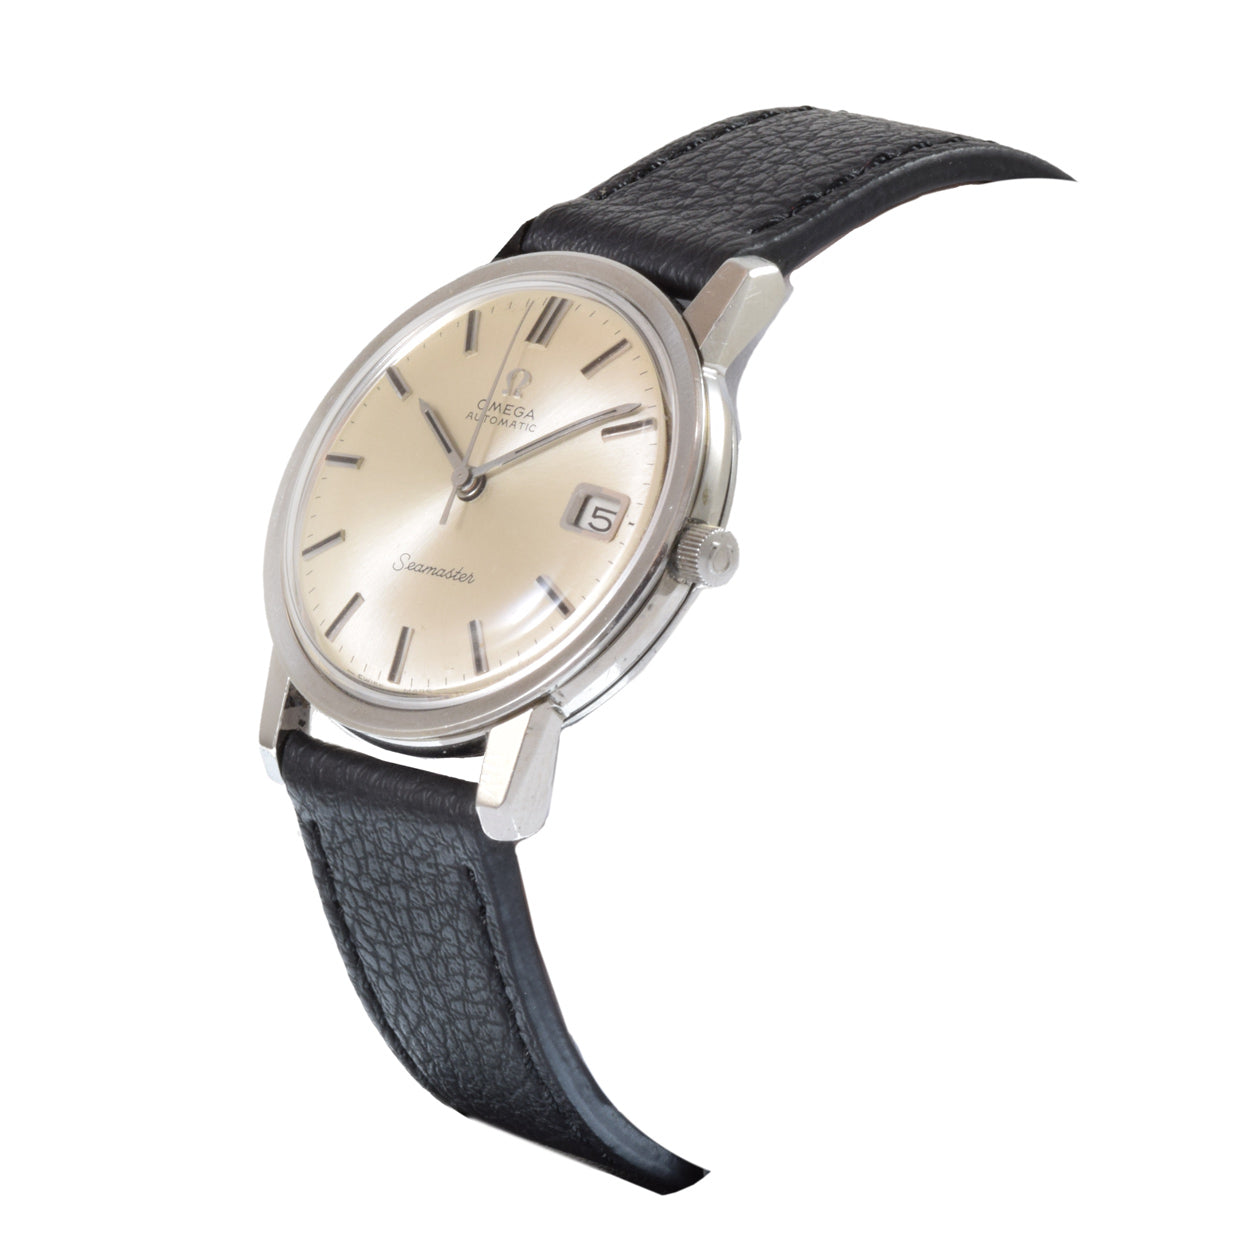 Vintage Omega Seamaster 1960's Automatic Watch